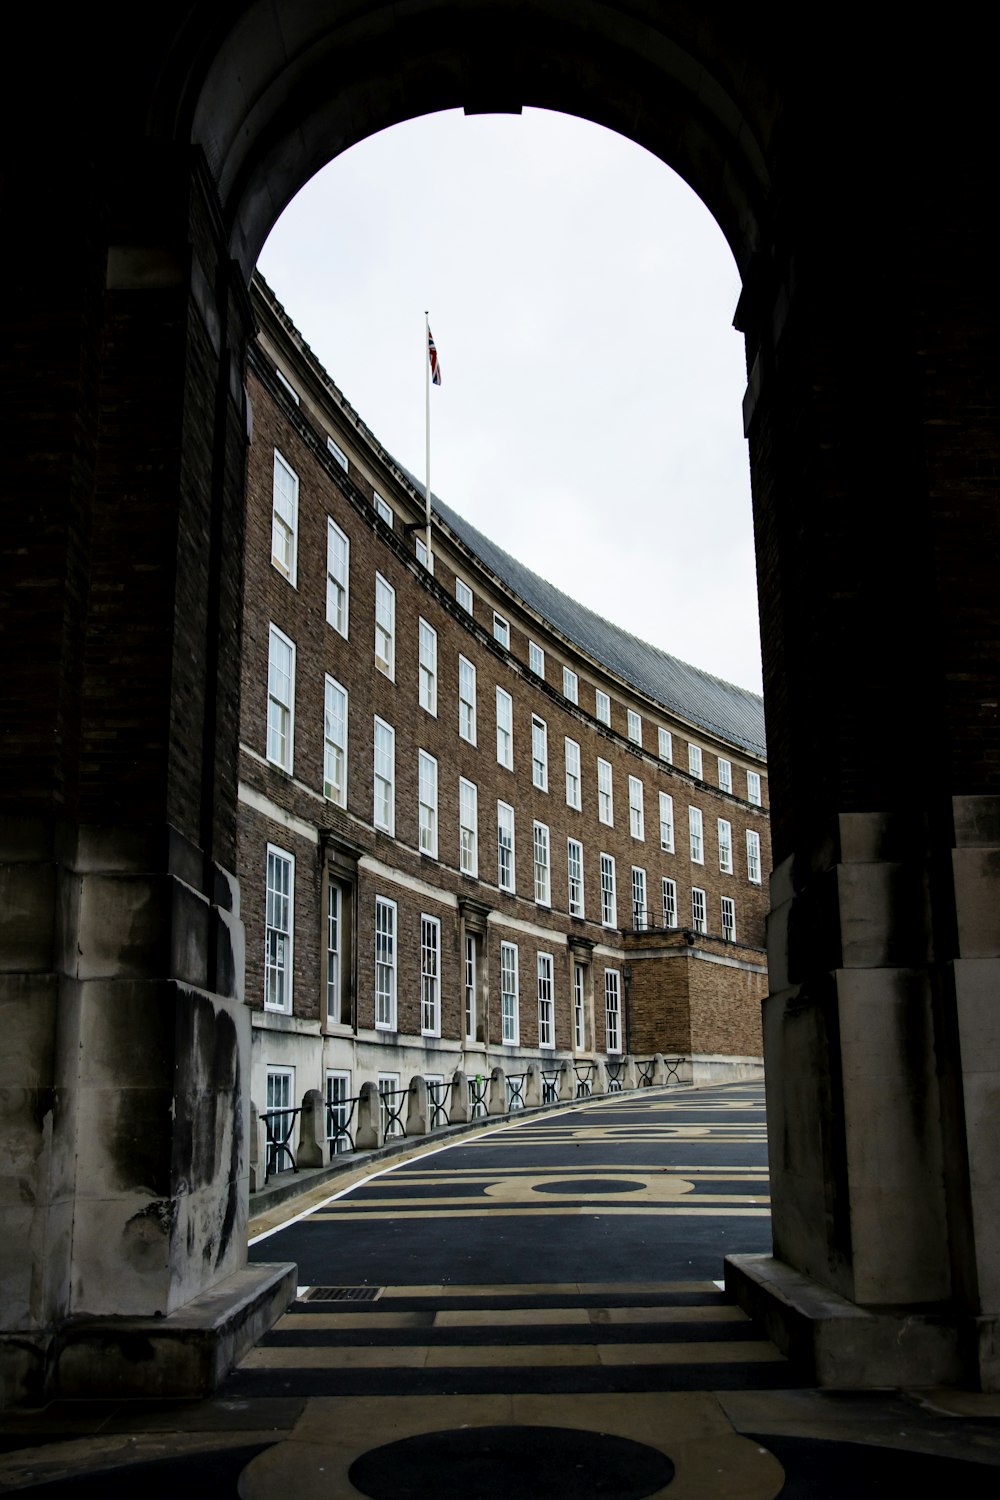 an archway leading to a building with a flag on top of it